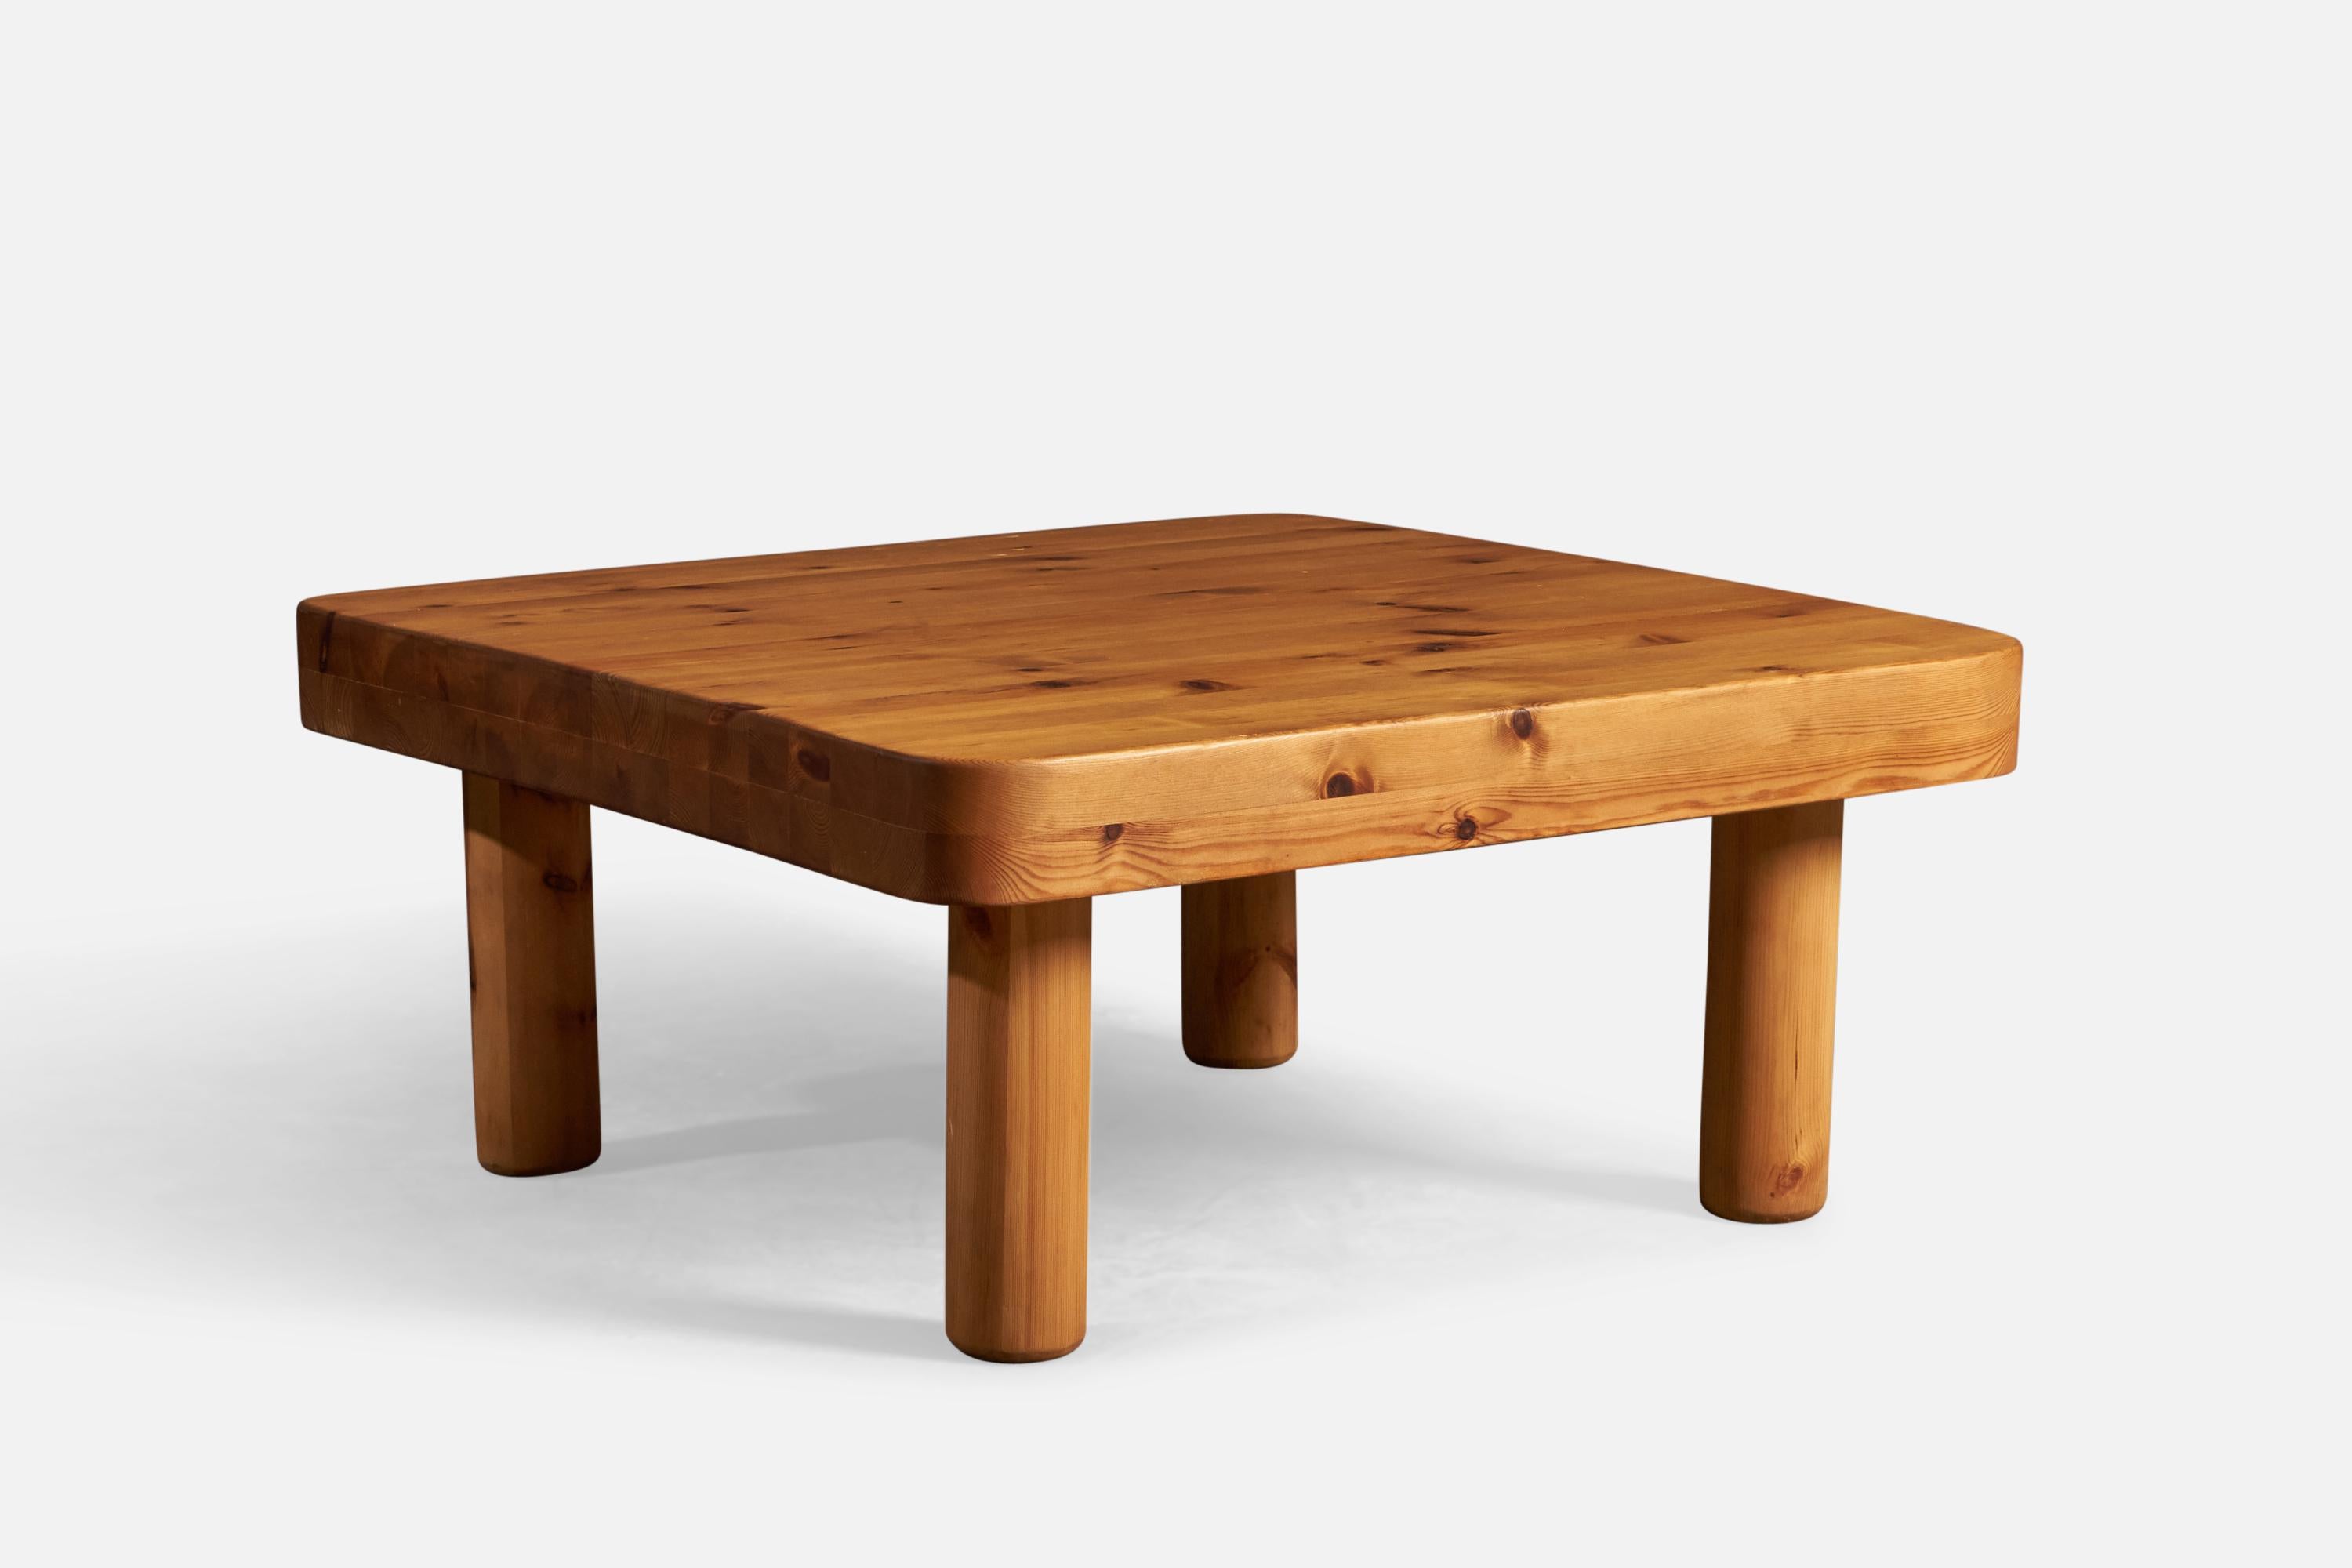 A solid pine coffee table design attributed to Charlotte Perriand, France, c. 1960s.